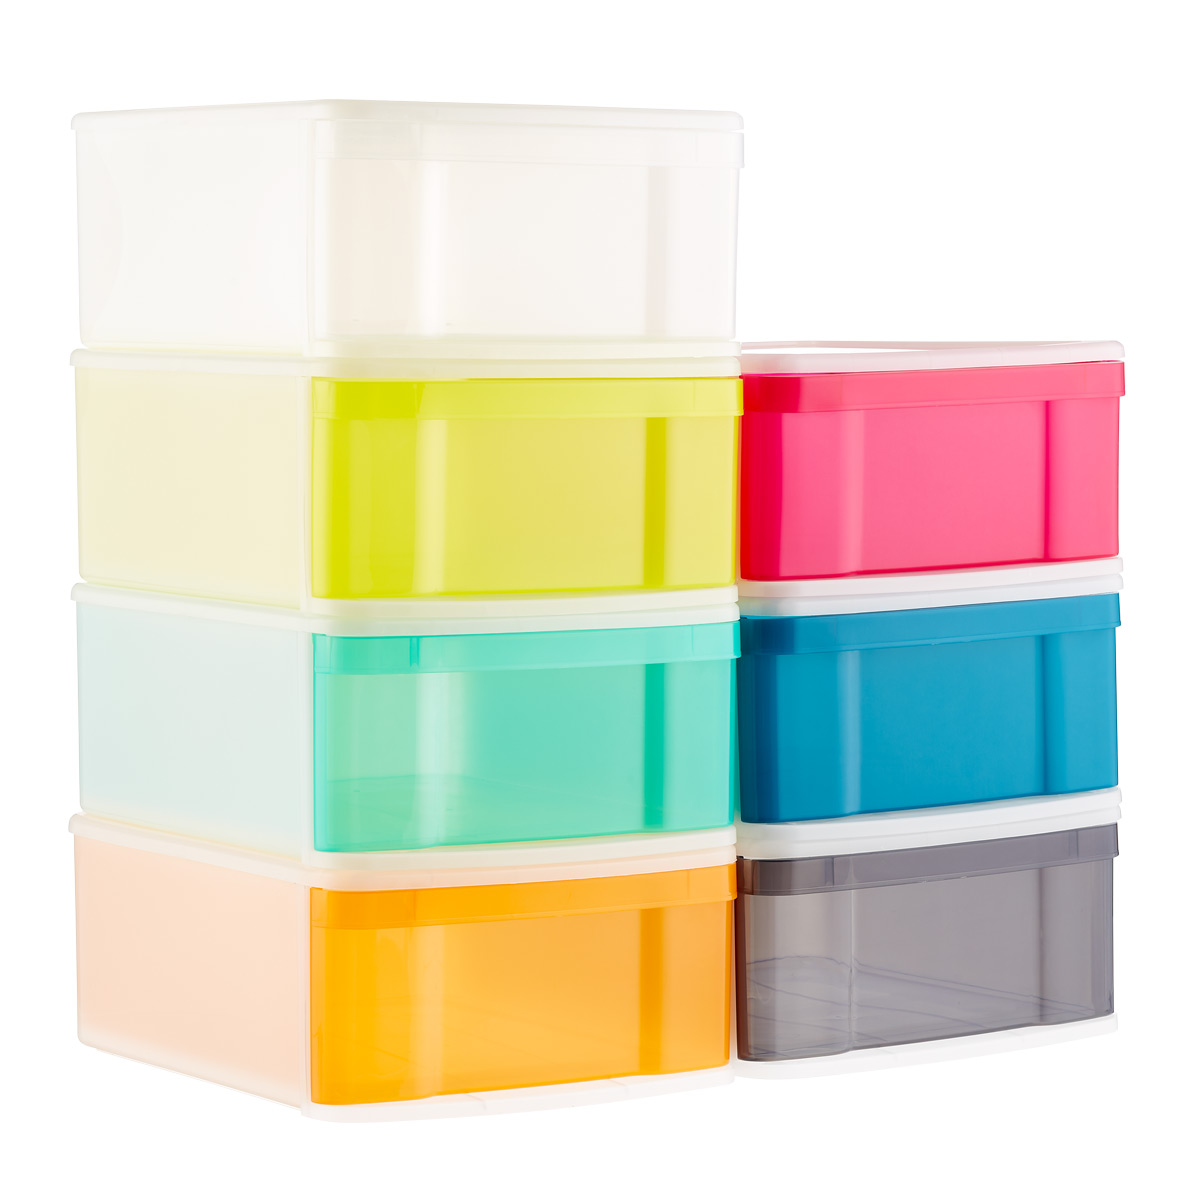 https://www.containerstore.com/catalogimages/517470/10014921g-tint-stacking-drawer-large.jpg